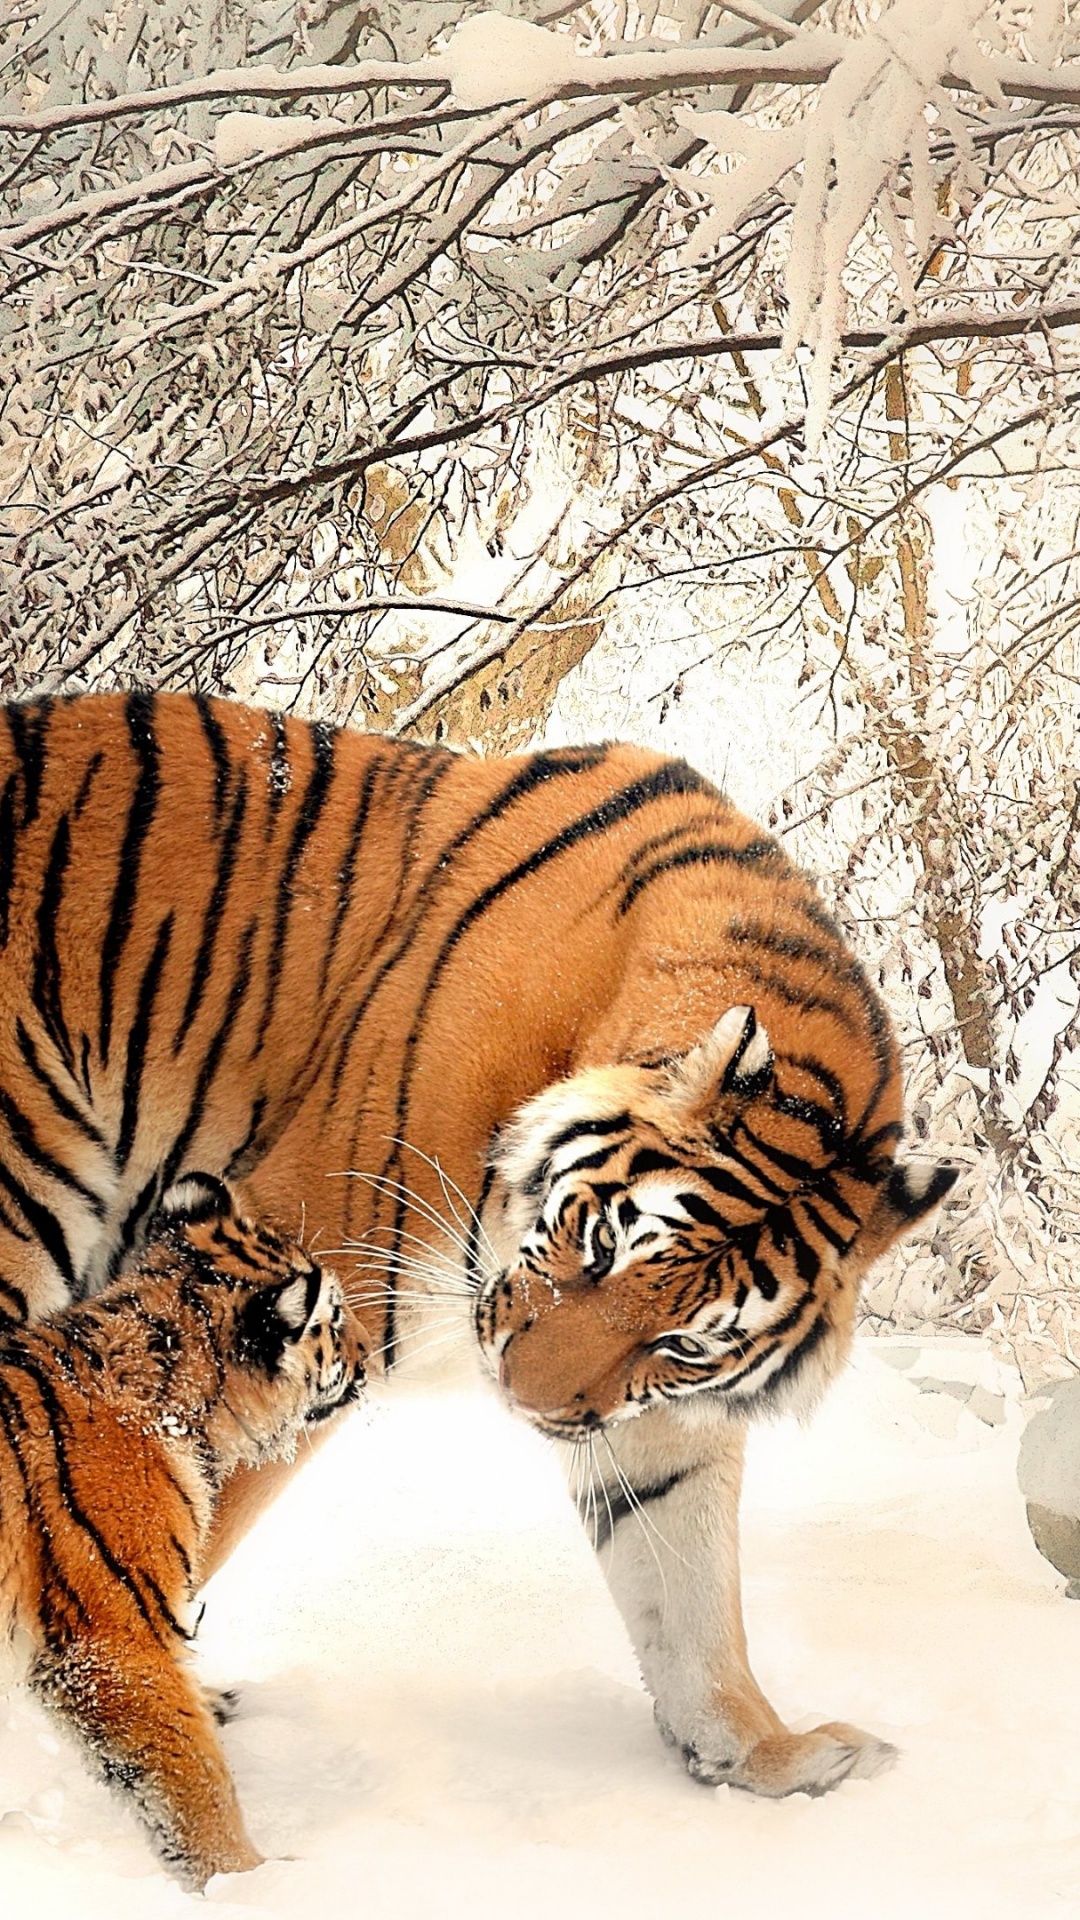 Tiger Walking on Snow Covered Ground During Daytime. Wallpaper in 1080x1920 Resolution